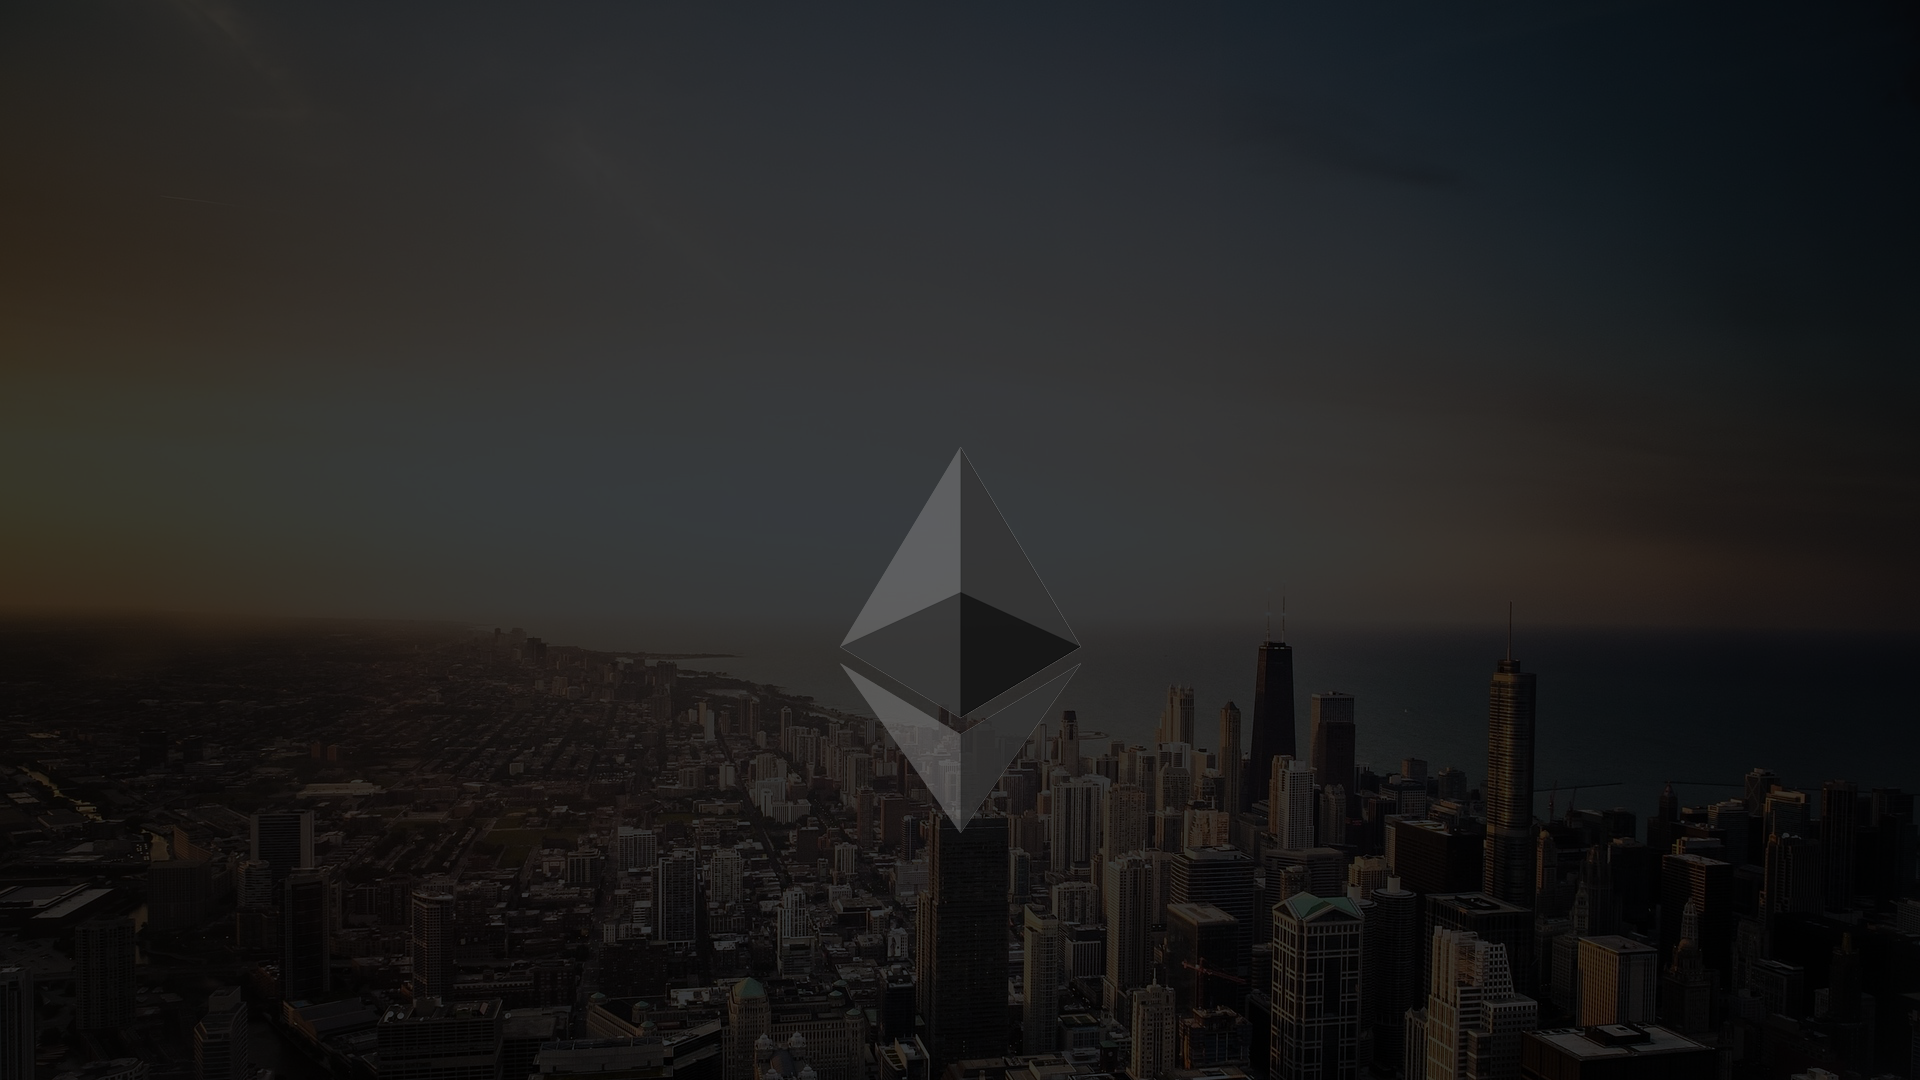 Ethereum Wallpaper 93 images in Collection Page 1